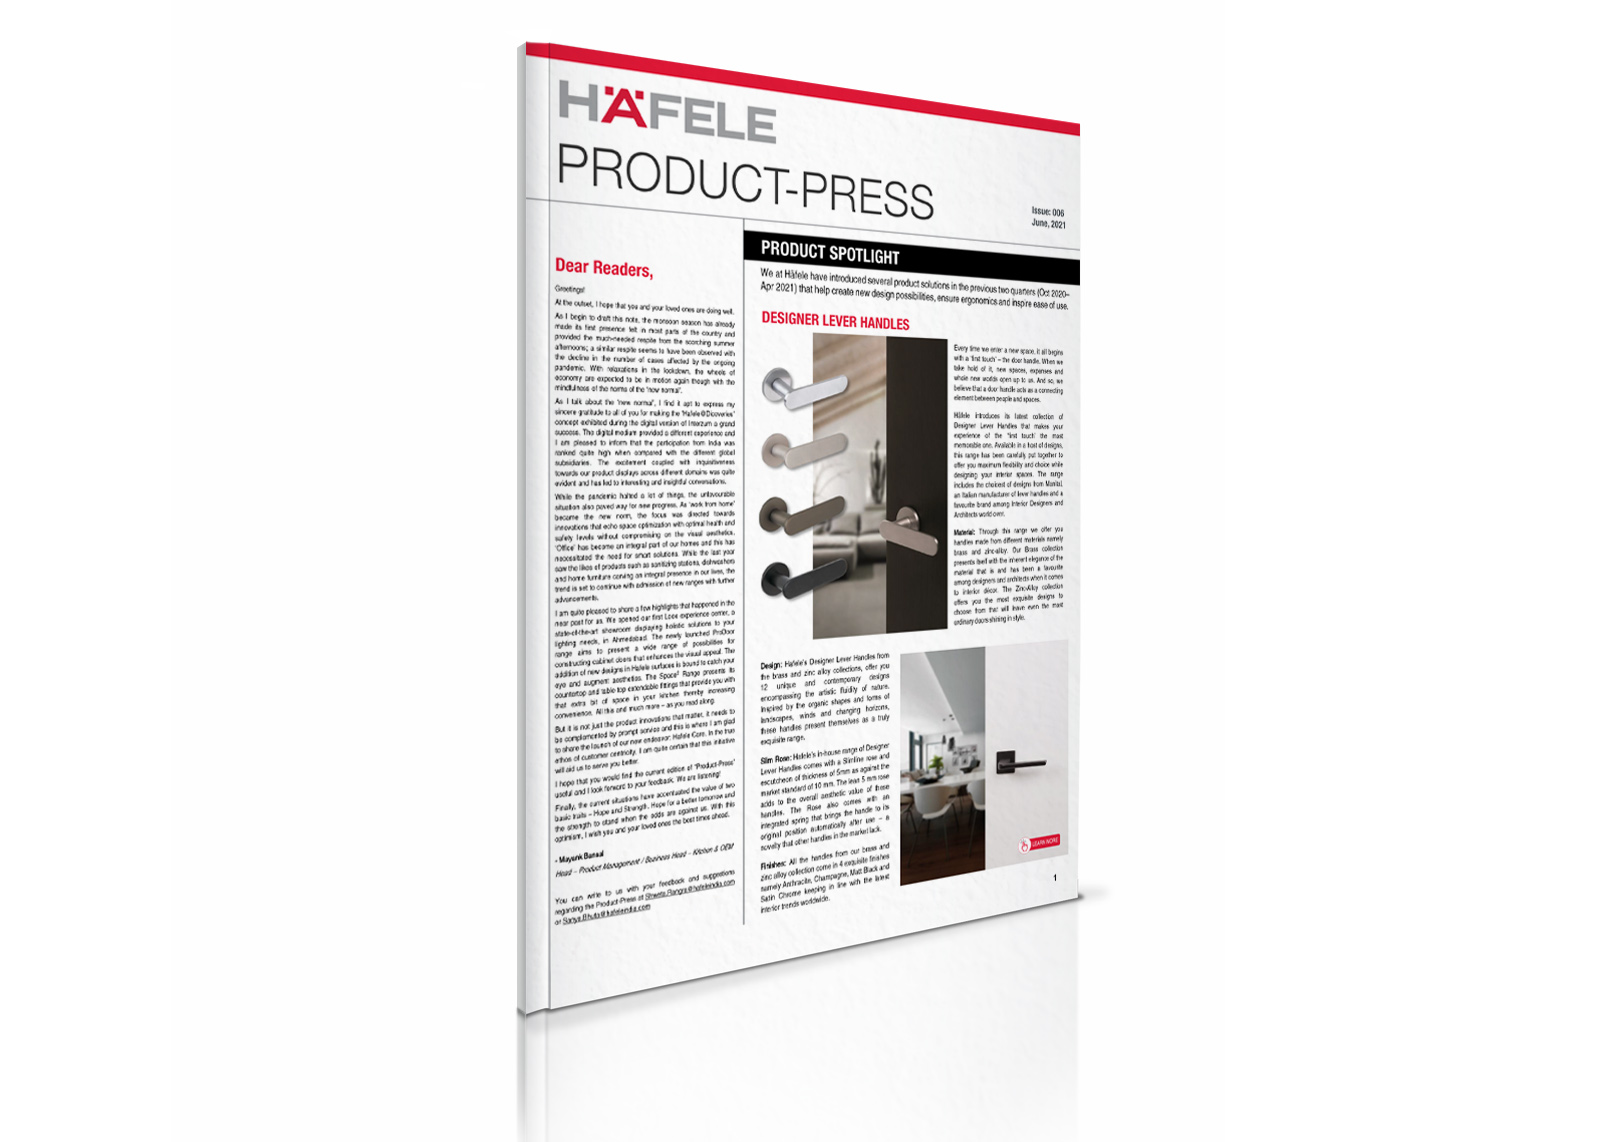 Product-Press Newsletter Issue 6